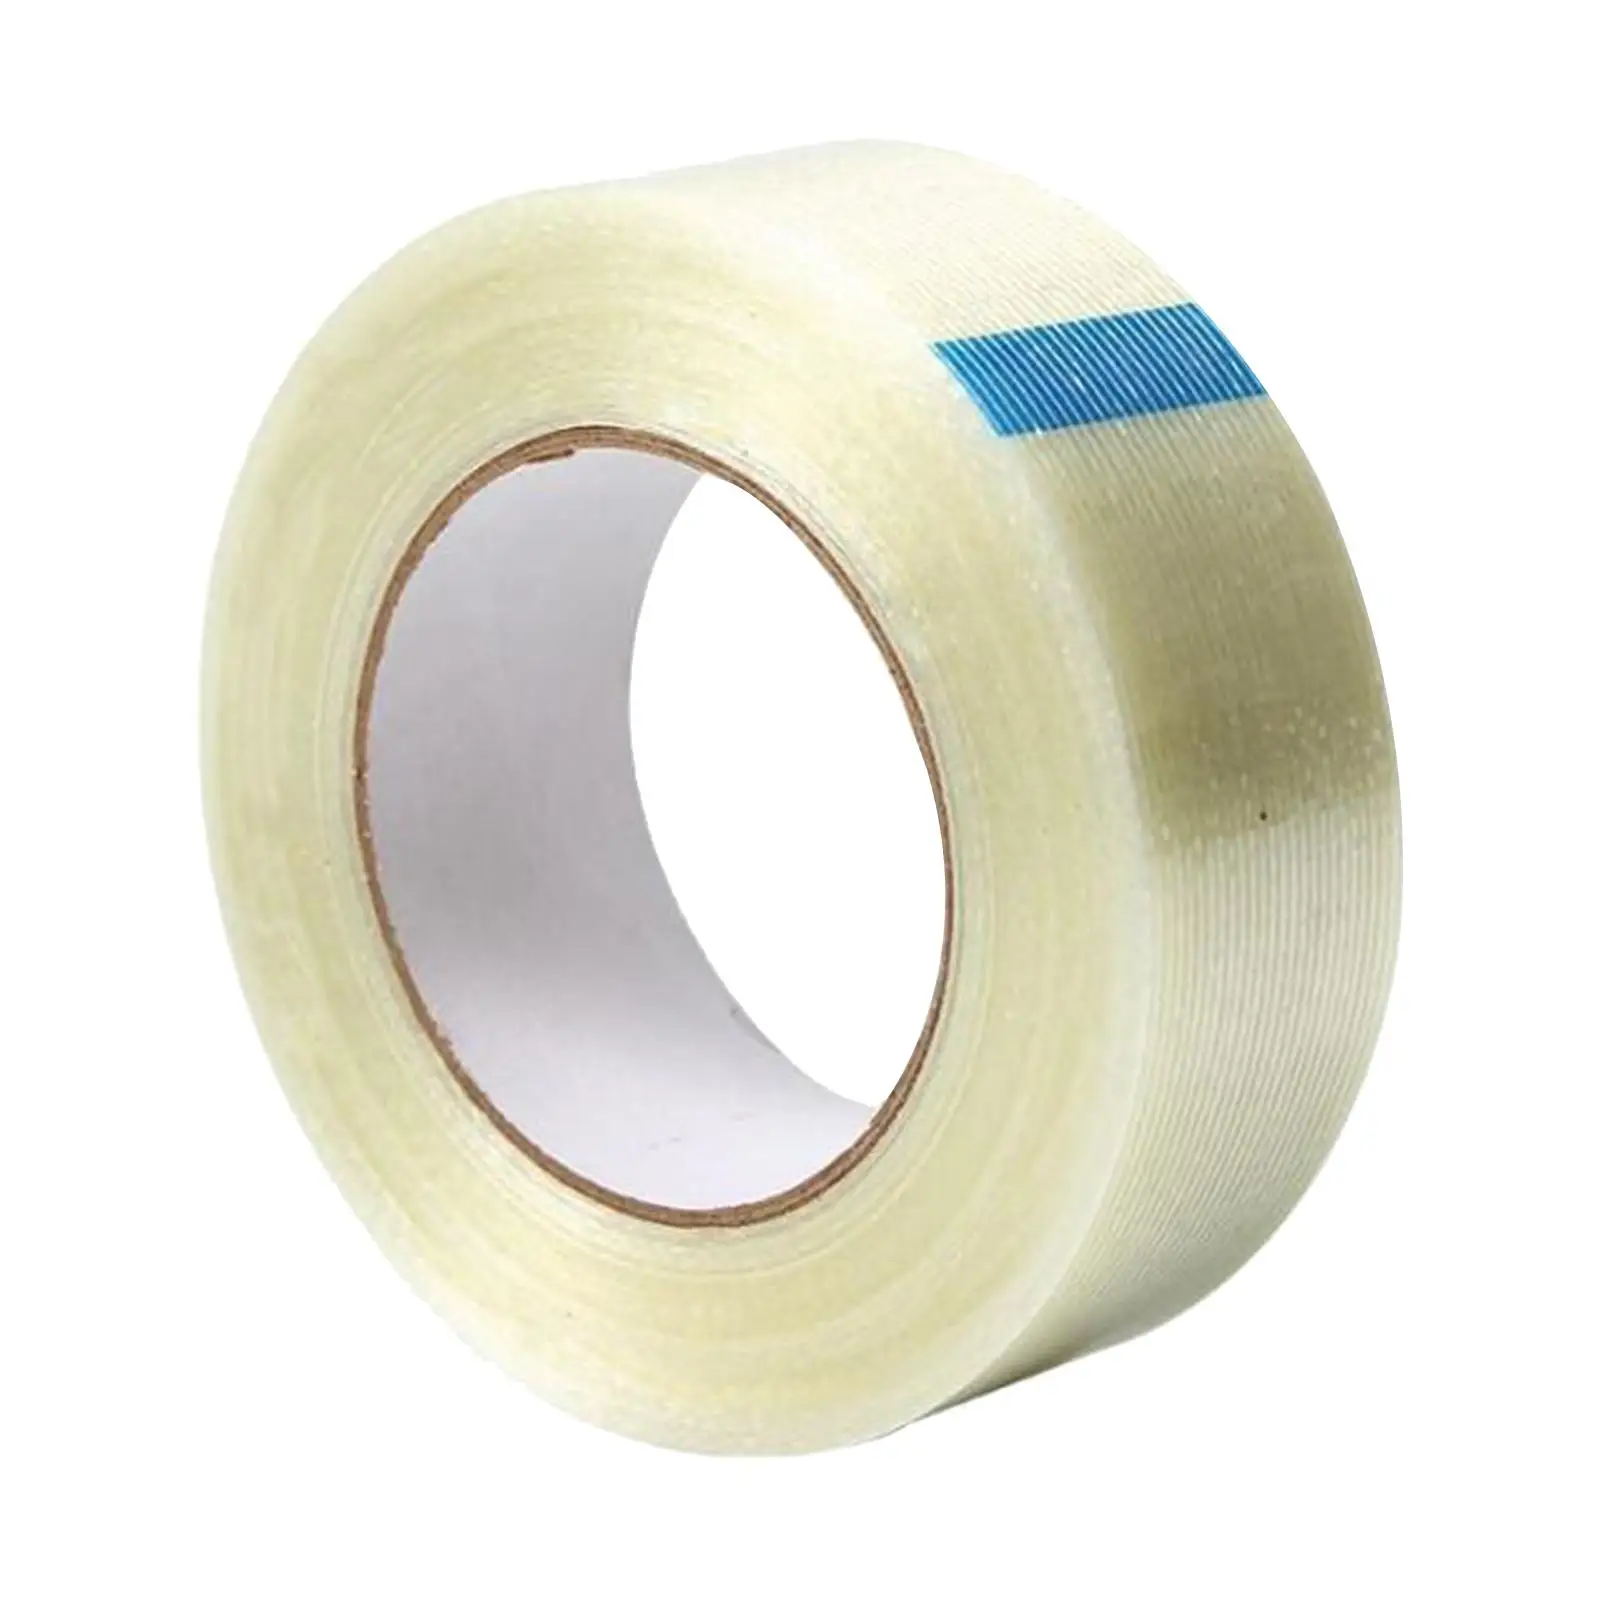 Wig Tape Roll Highly Sticky Bonding Tape for Synthetic Wigs Hair Making Weaving Hairs System